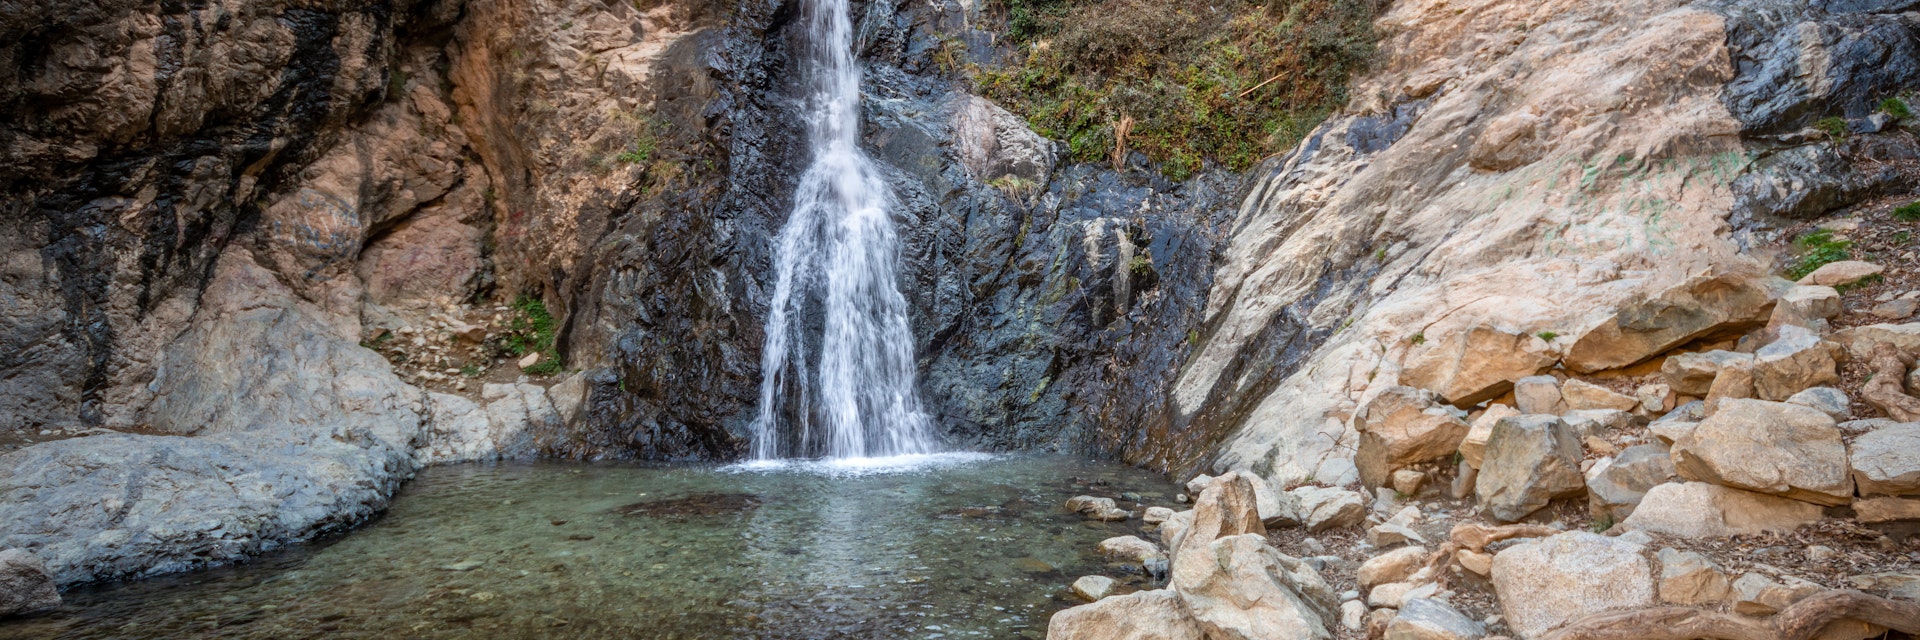 One of the seven waterfalls, in Ourika Valley, close to Setti Fatma village, Atlas Mountains, Morocco